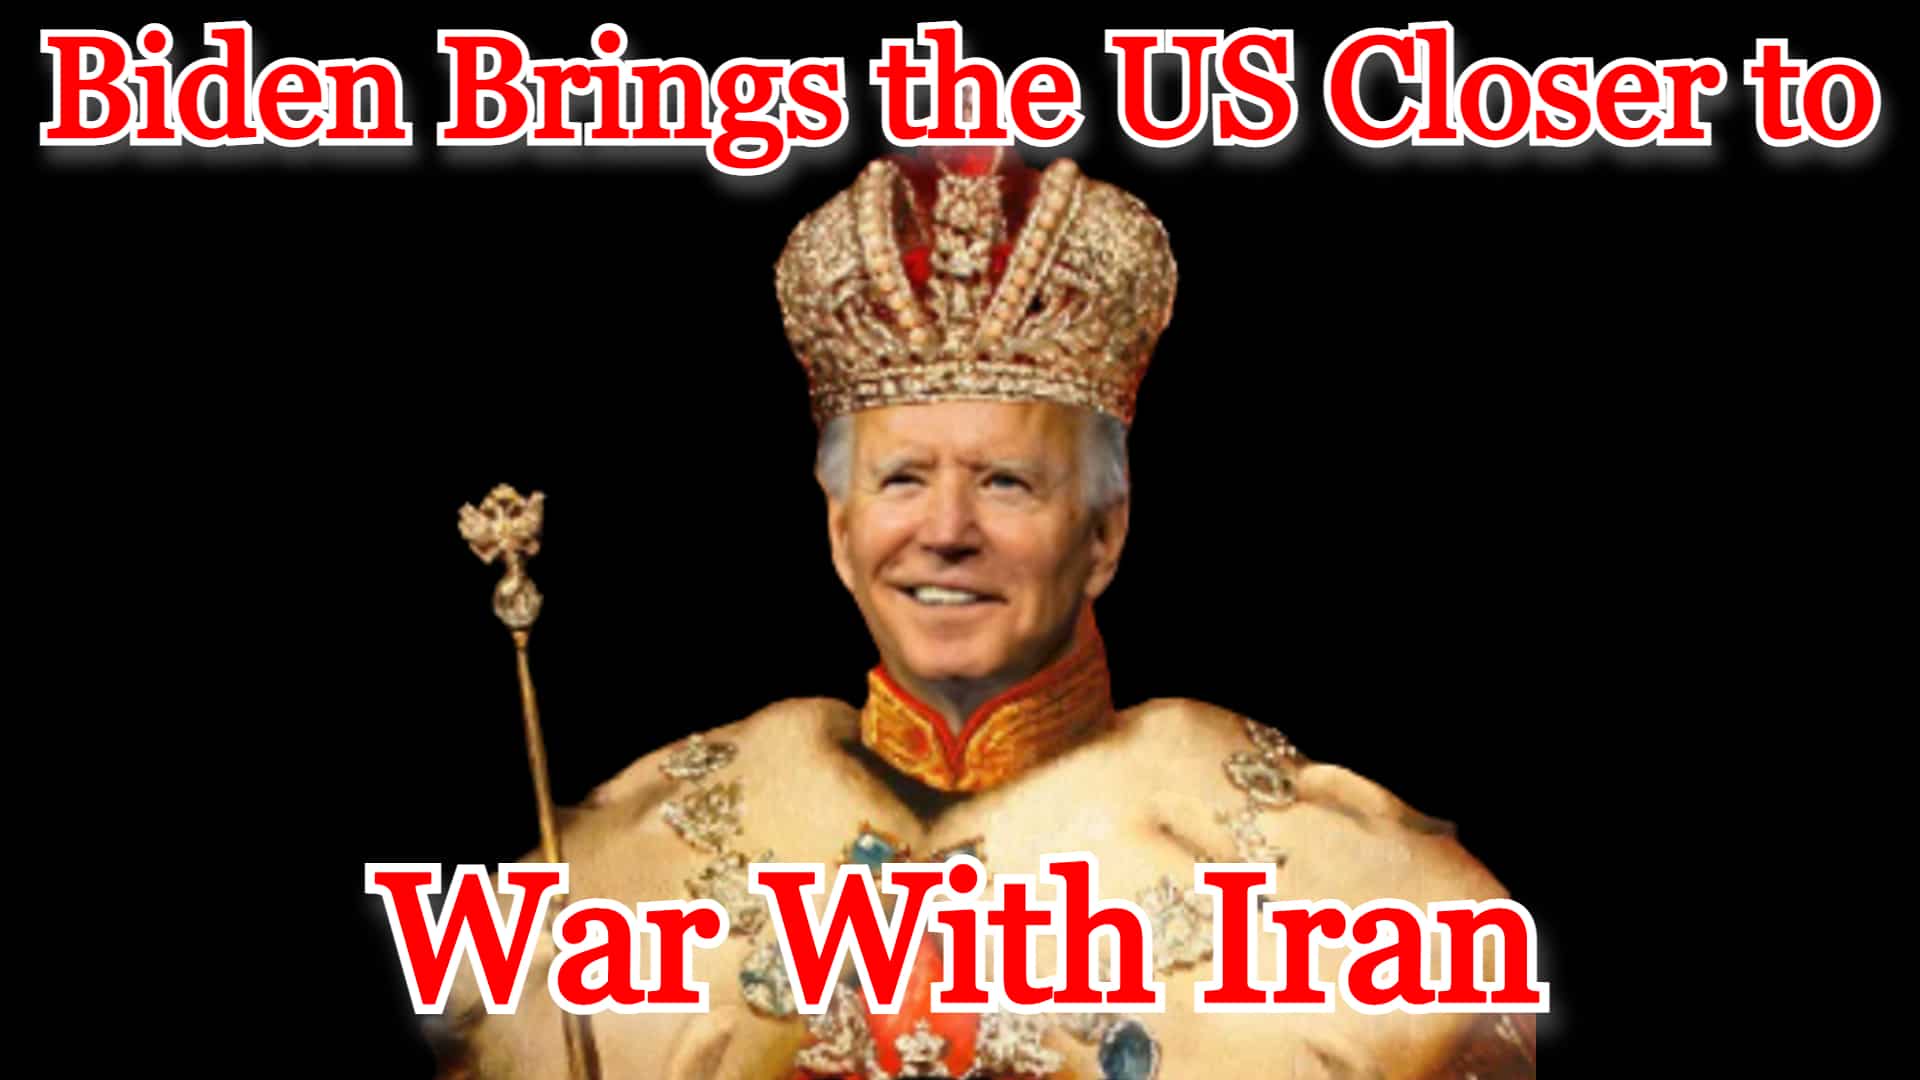 COI #283: Biden Brings the US Closer to War With Iran